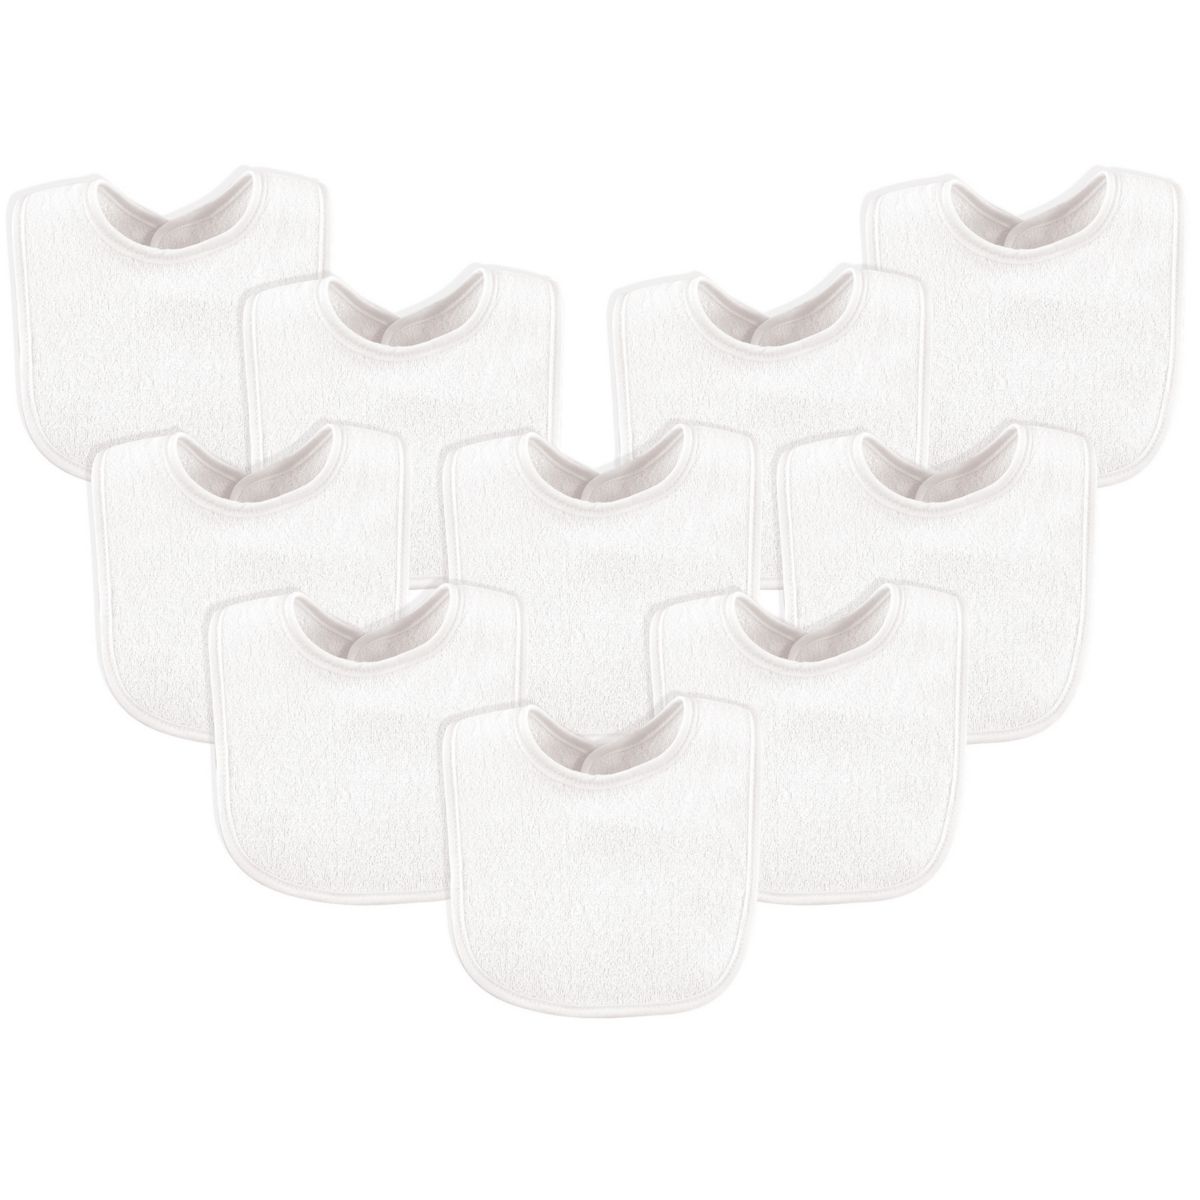 Luvable Friends Baby Cotton Terry Bibs 10pk, White, One Size Luvable Friends